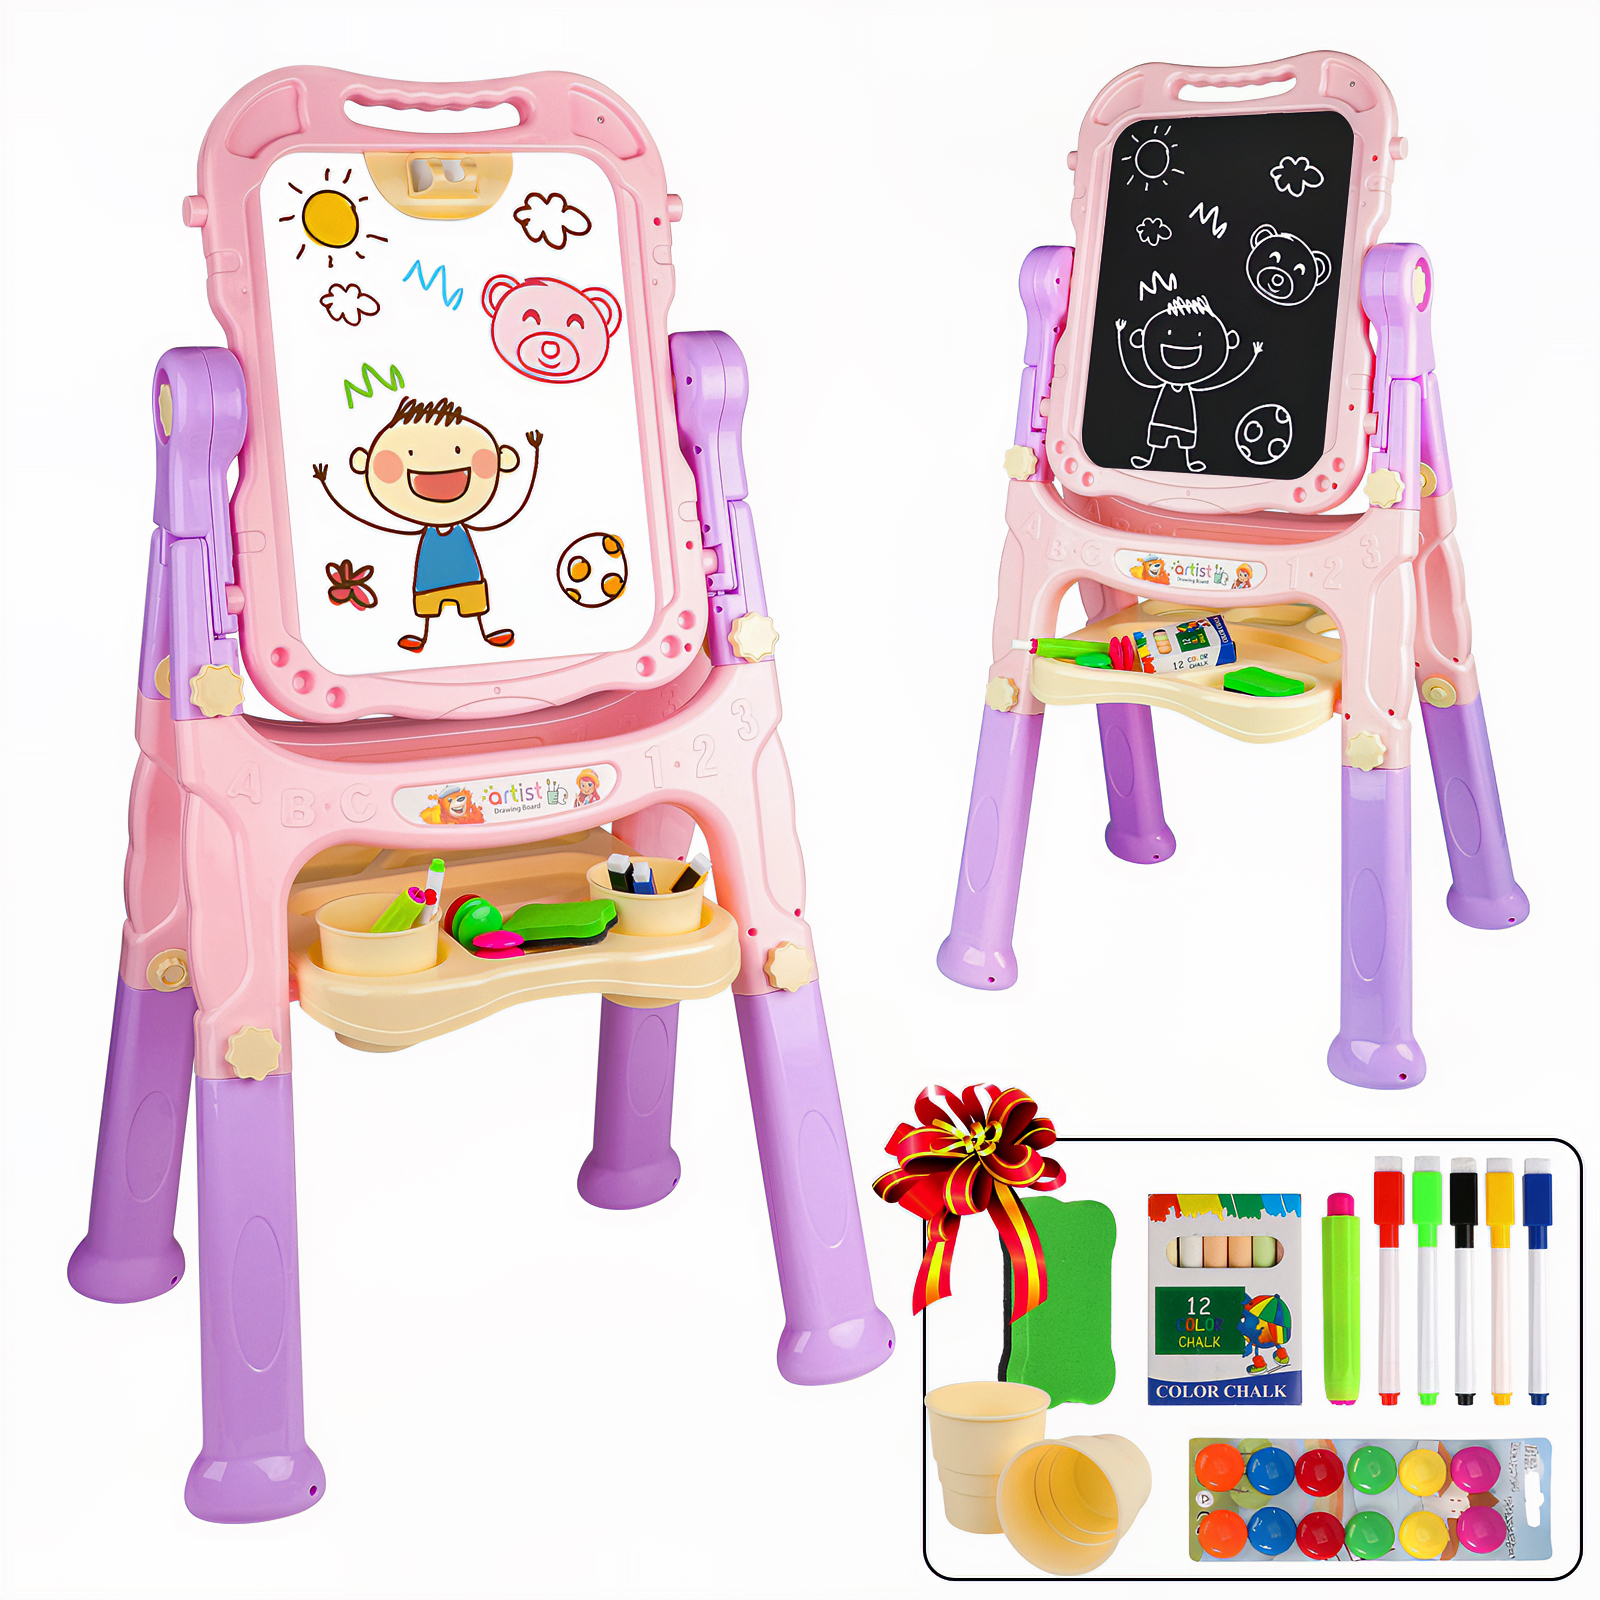 Double Sided Magnetic Whiteboard Chalkboard Painting Easel for Kids 